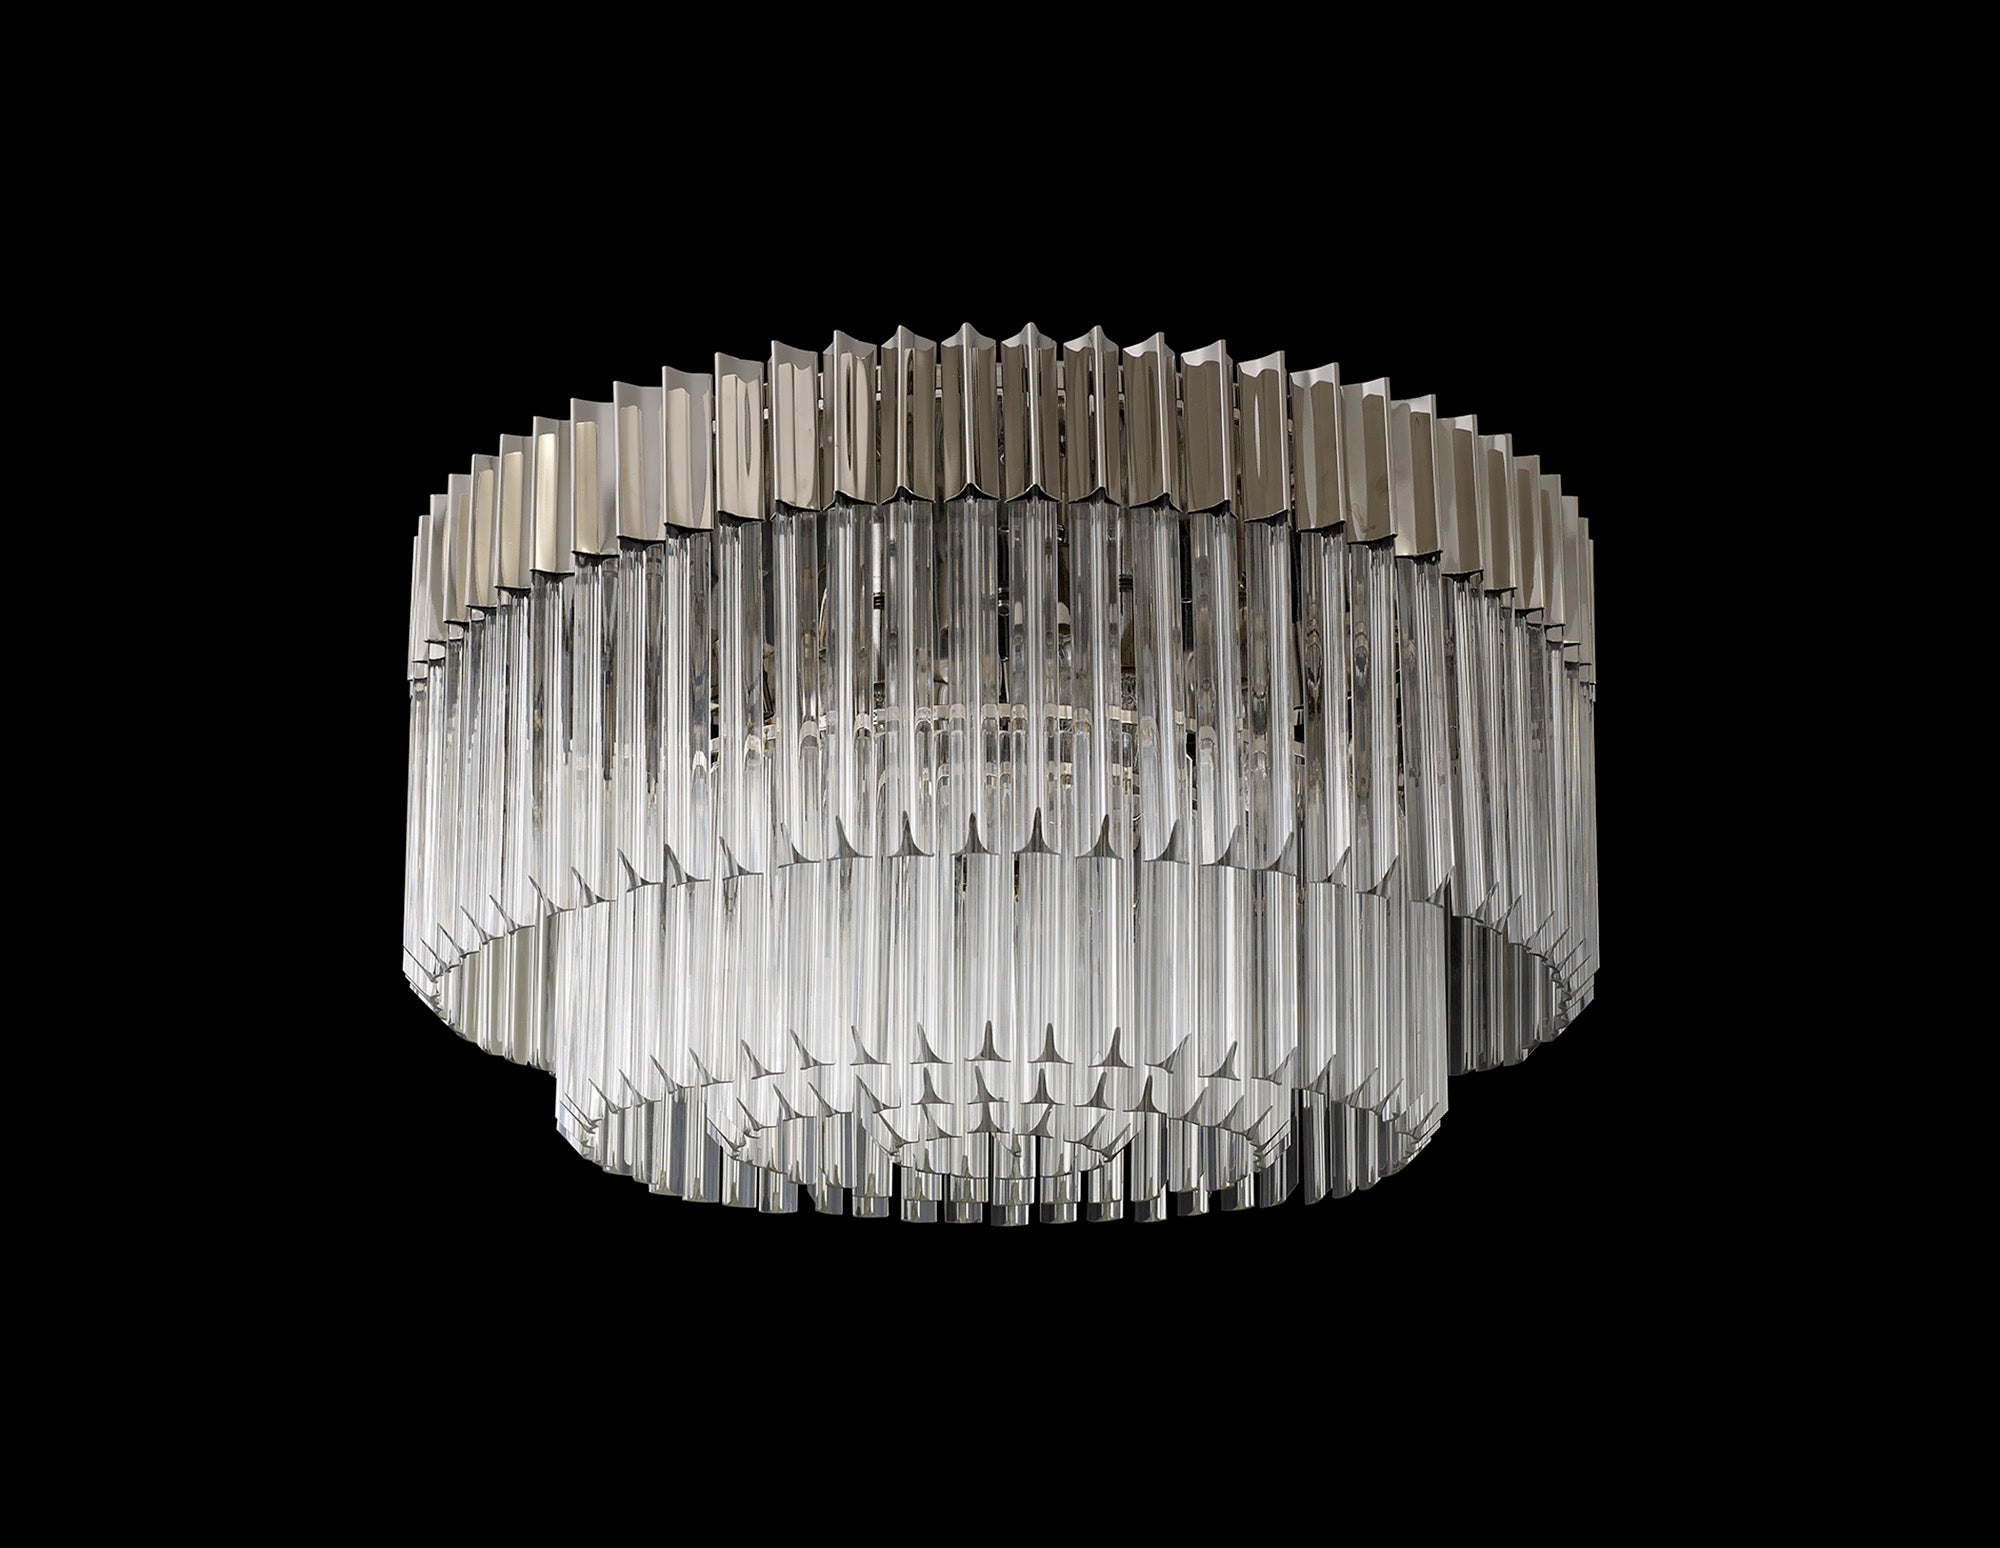 Knightsbridge Ceiling Round 12 Light E14, Polished Nickel/Clear Glass - LO182423.  Item Weight: 28.4kg